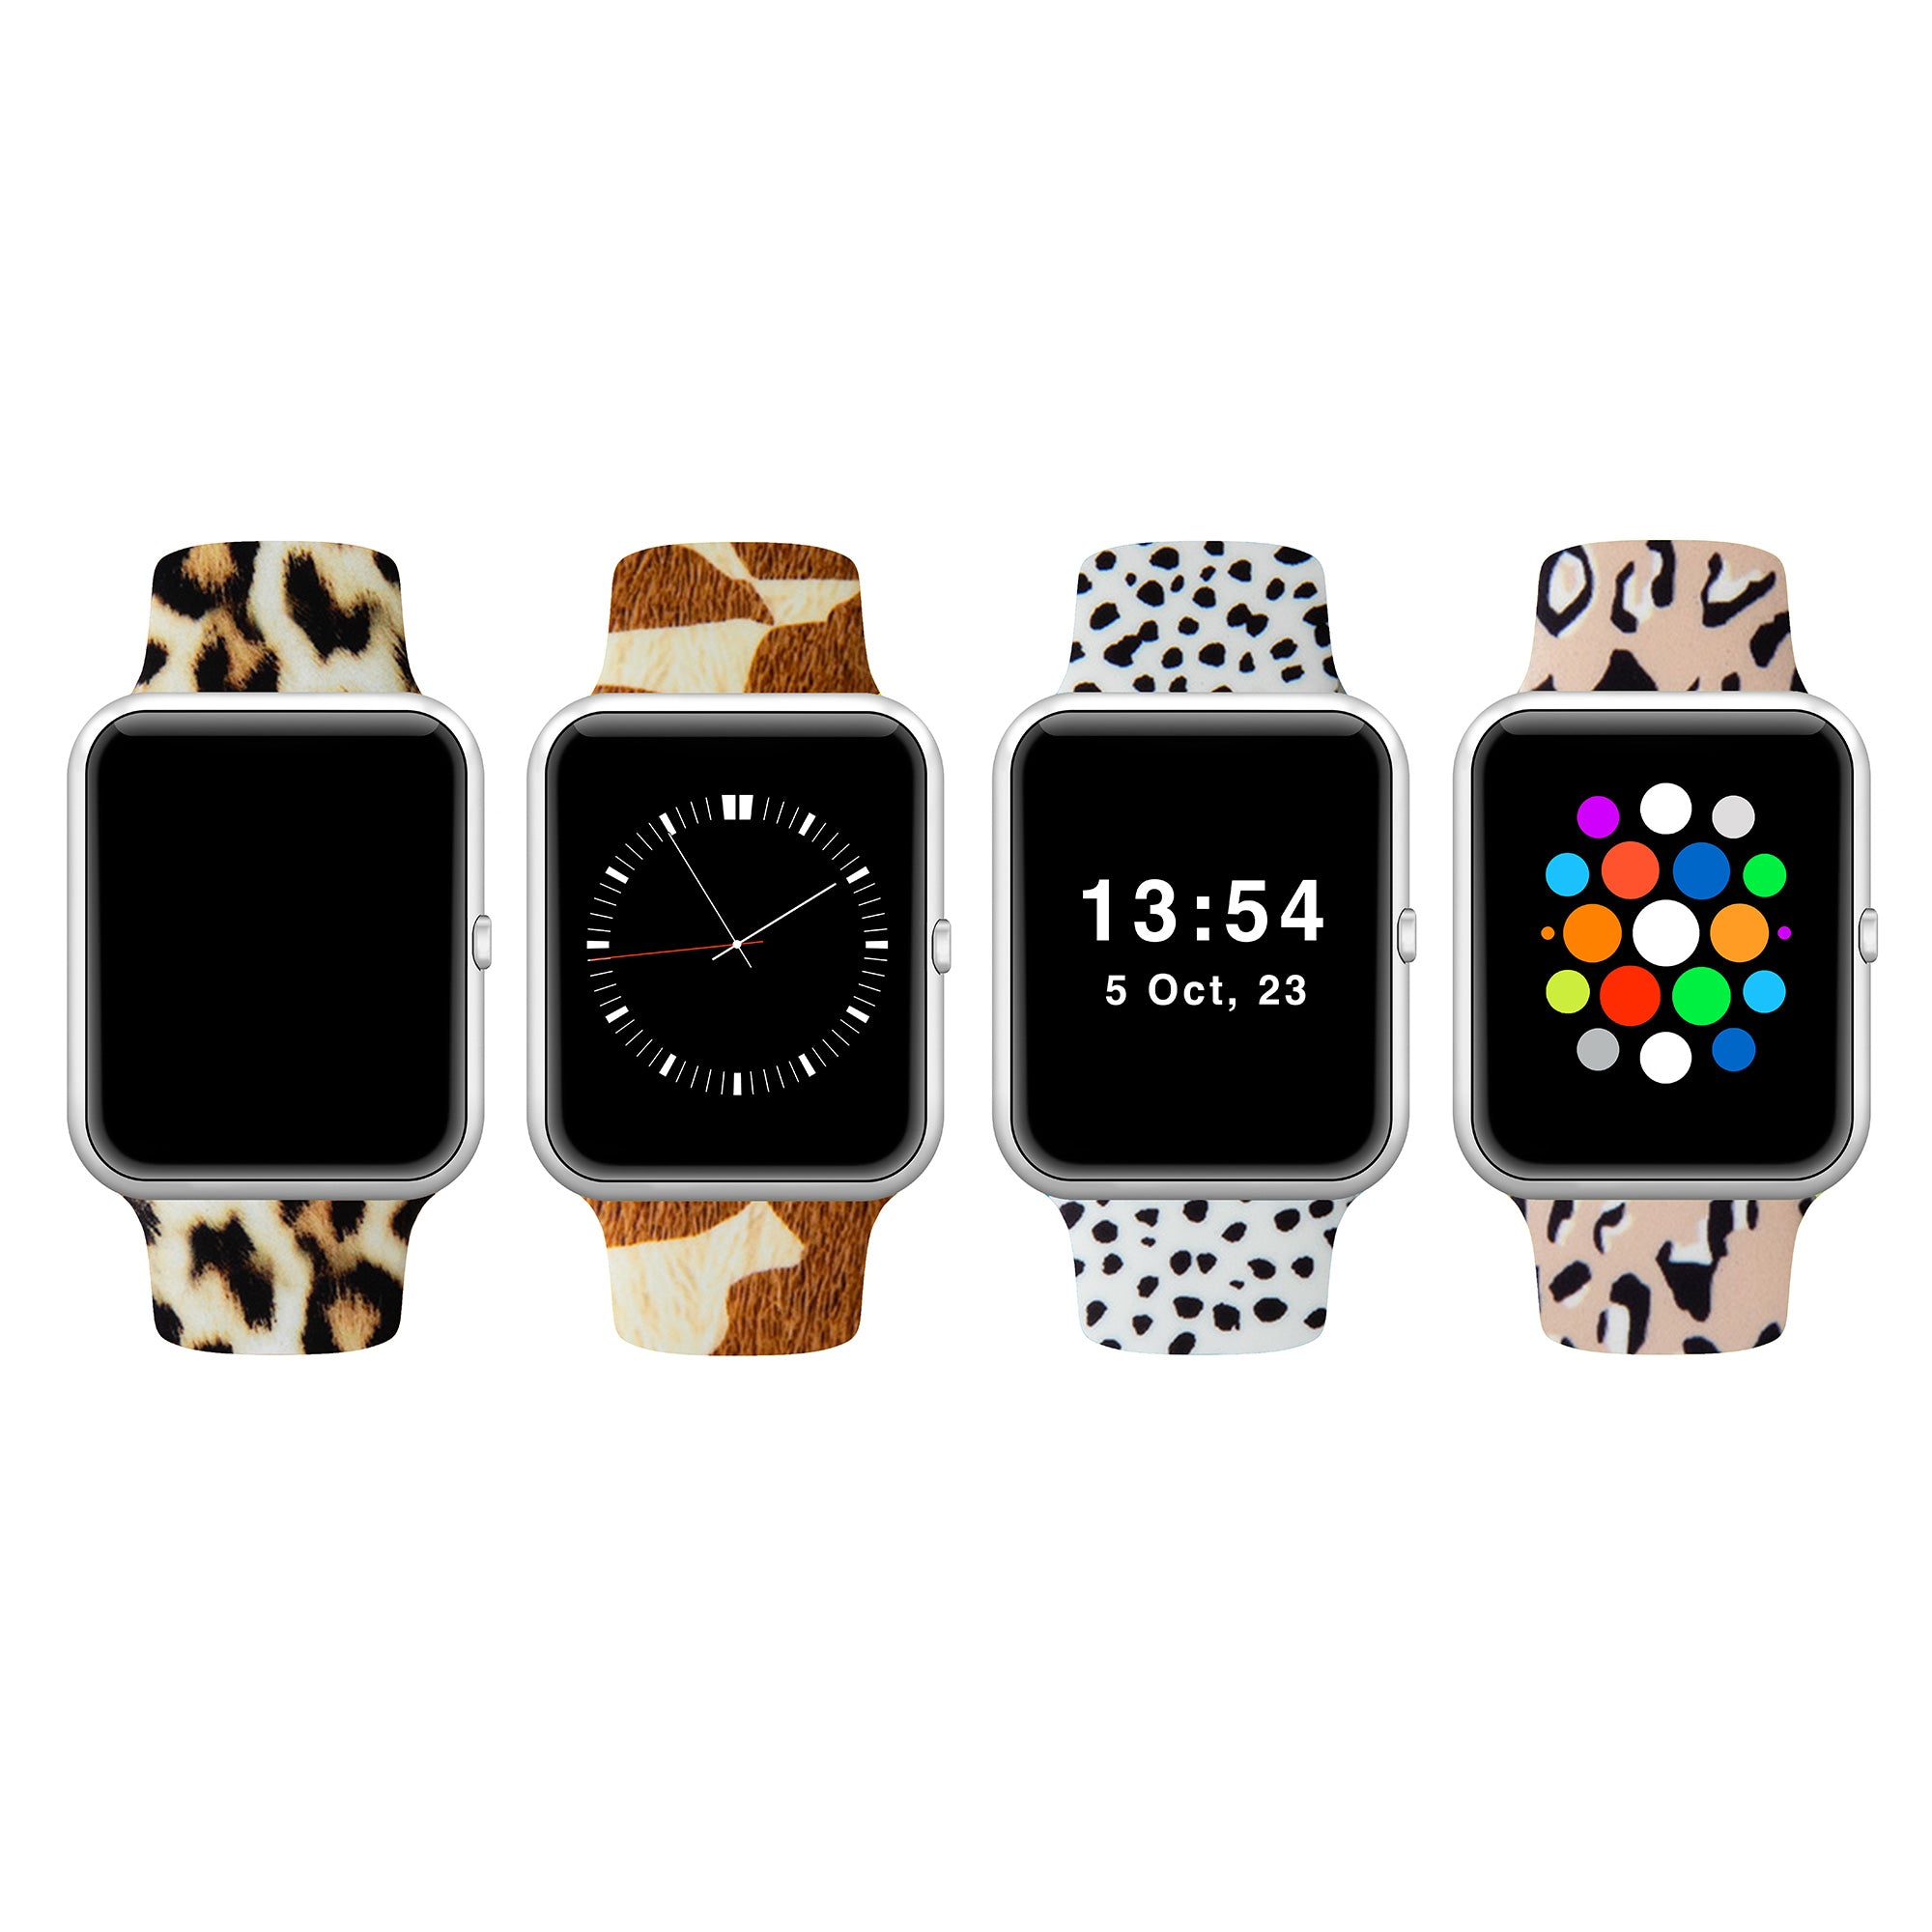 Patterned Silicone Apple Watch Band 38mm/40mm 42mm/44mm - Black & White Buffalo Plaid - 38mm/40mm